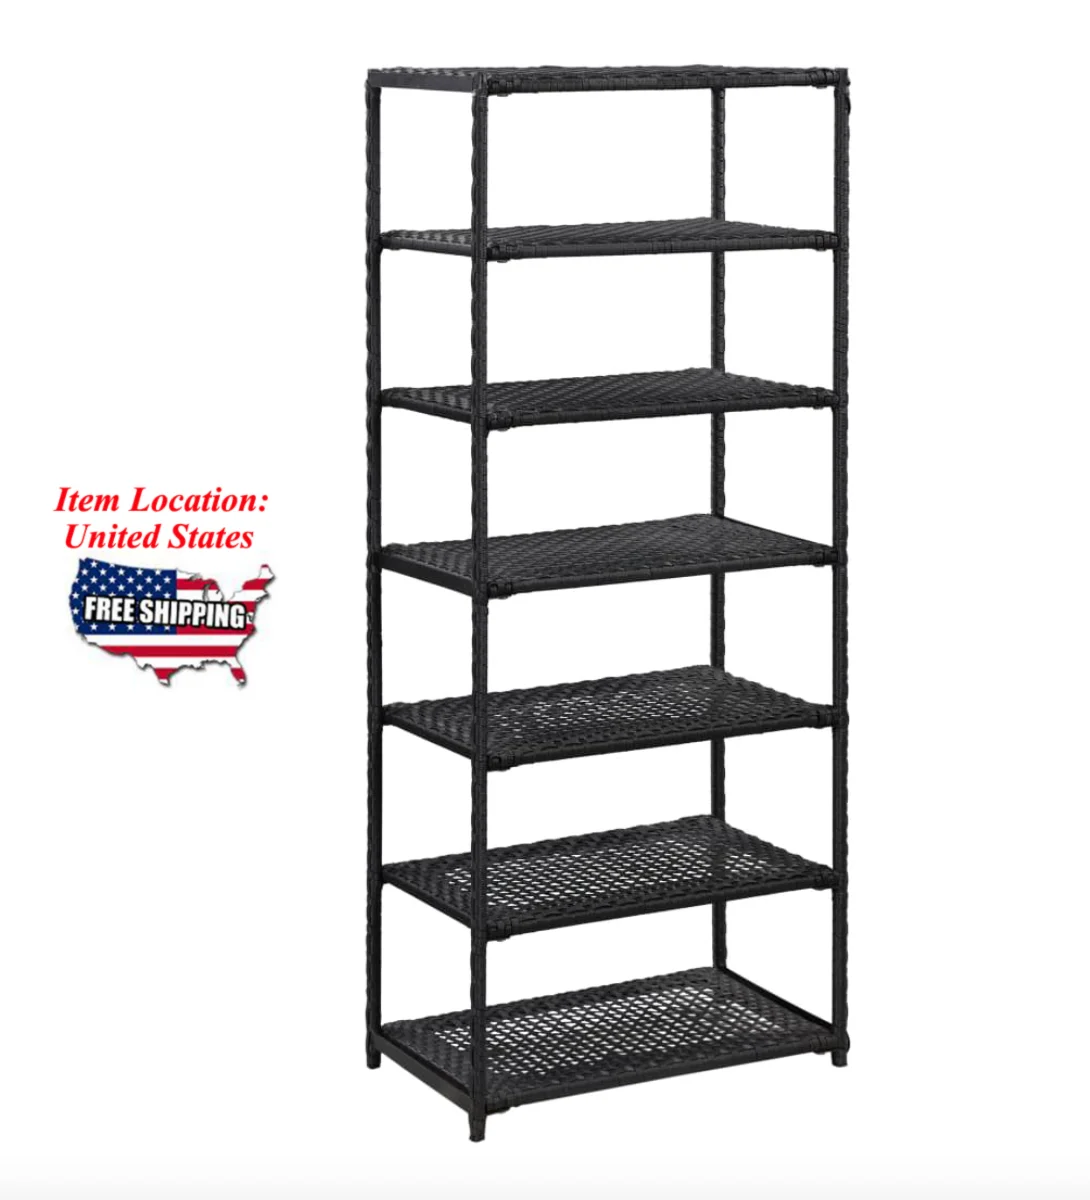 

Shoe Rack Black 19.7"x11.8"x47.2" Poly Rattan, living room furniture shoe rack furniture organizer, SHIPPING FROM UNITED STATES